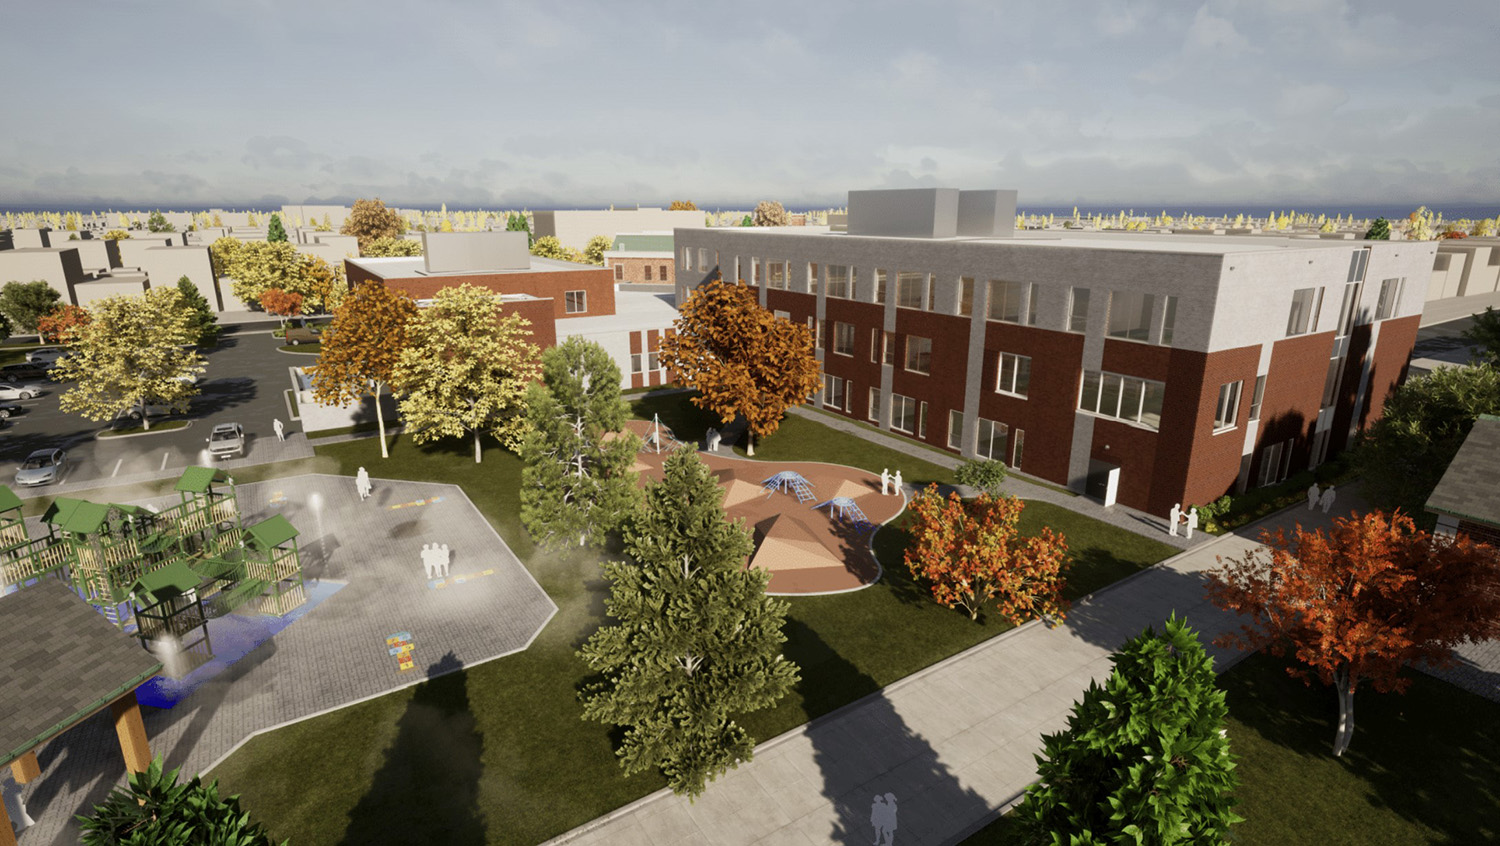 View of Belmont Cragin Elementary School at 6100 W Fullerton Avenue. Rendering by SMNGA and FORMA Architecture